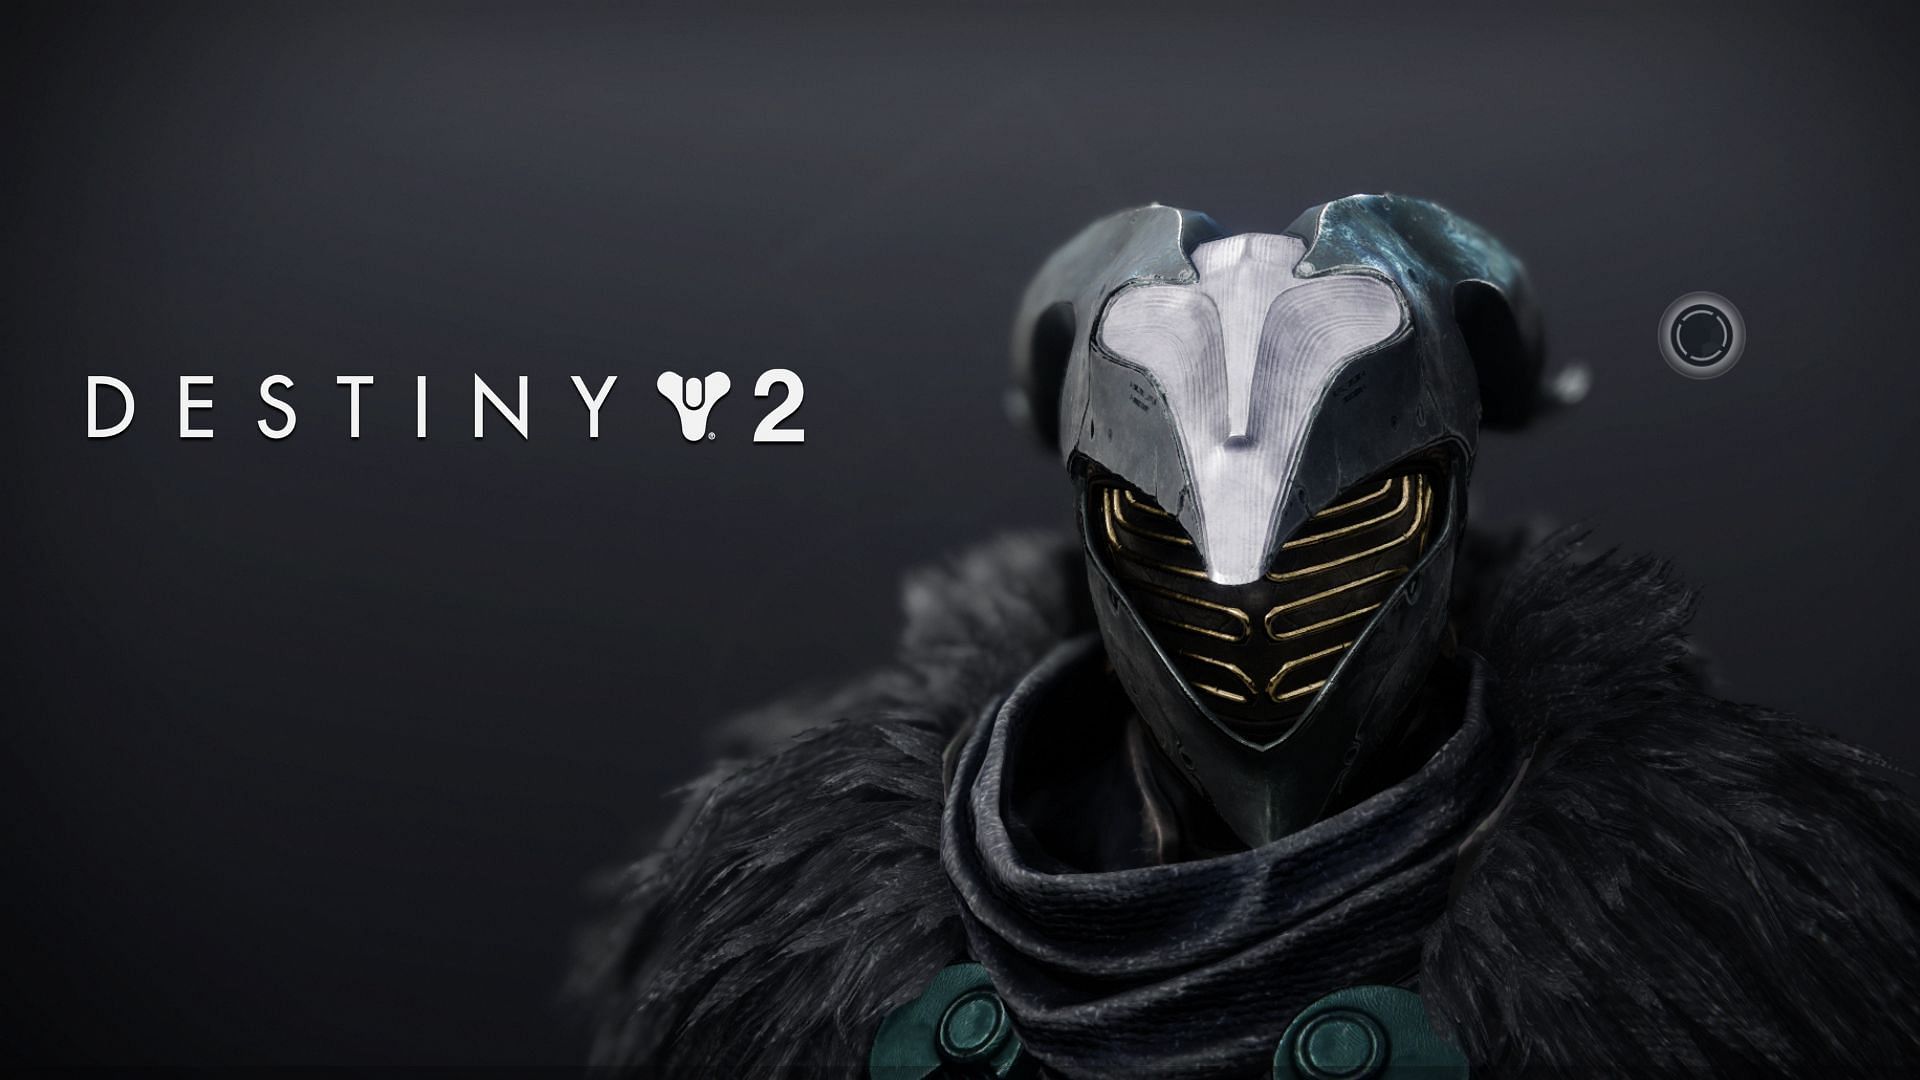 Felwinter&#039;s helm can increase player&#039;s stats and debuff enemies (Image via Bungie)